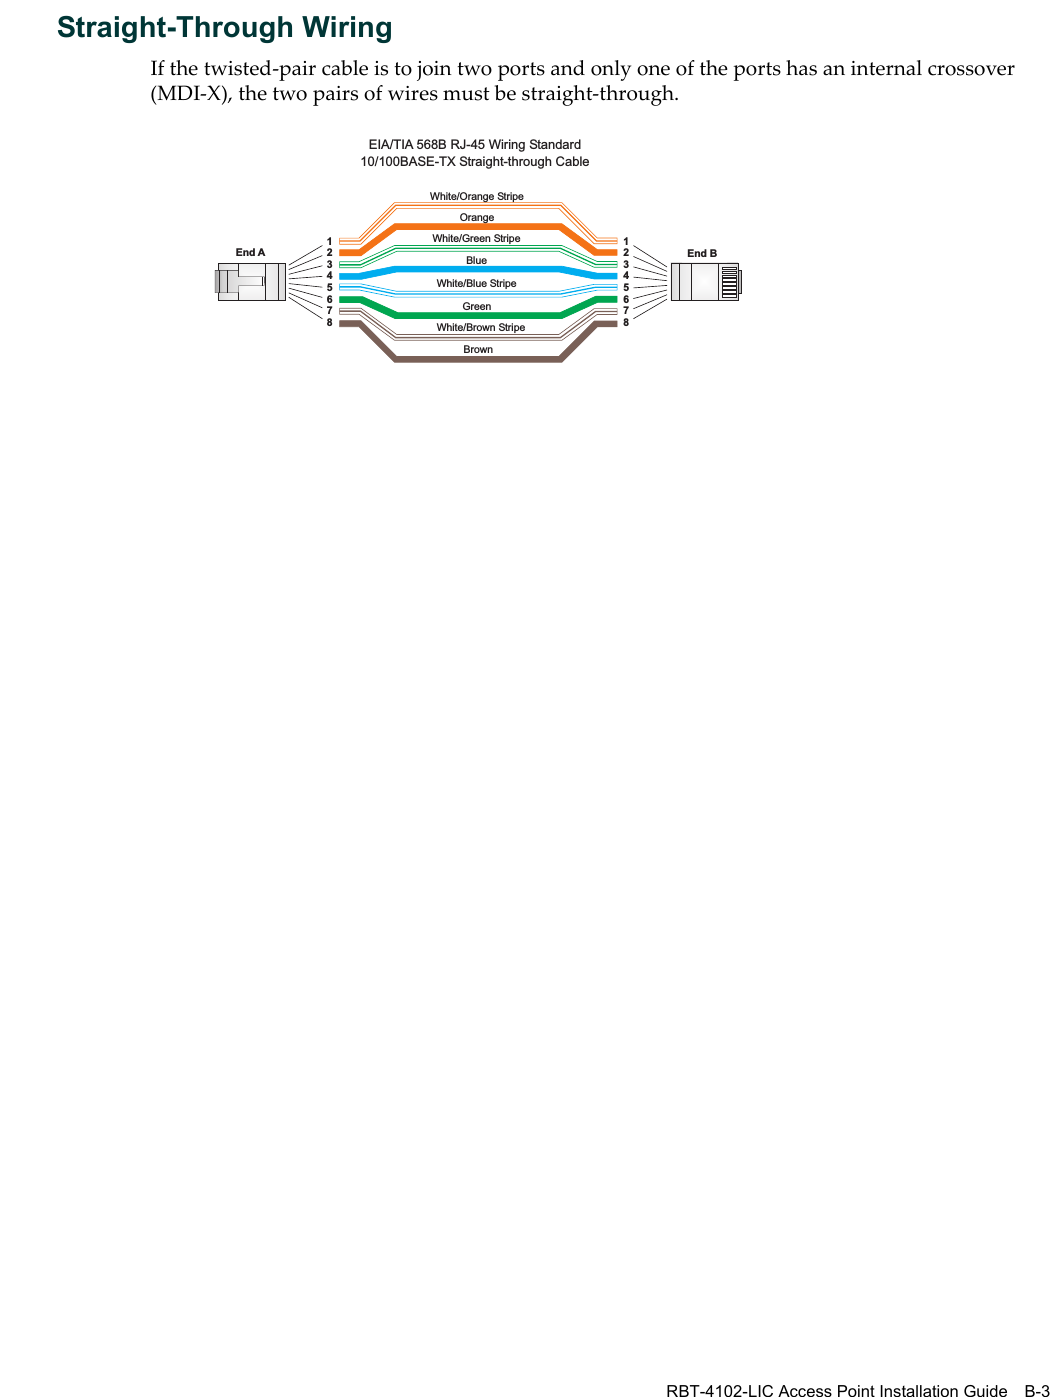  RBT-4102-LIC Access Point Installation Guide B-3Straight-Through WiringIfthetwisted‐paircableistojointwoportsandonlyoneoftheportshasaninternalcrossover(MDI‐X),thetwopairsofwiresmustbestraight‐through.White/Orange StripeOrangeWhite/Green StripeGreen1234567812345678EIA/TIA 568B RJ-45 Wiring Standard10/100BASE-TX Straight-through CableEnd A End BBlueWhite/Blue StripeBrownWhite/Brown Stripe